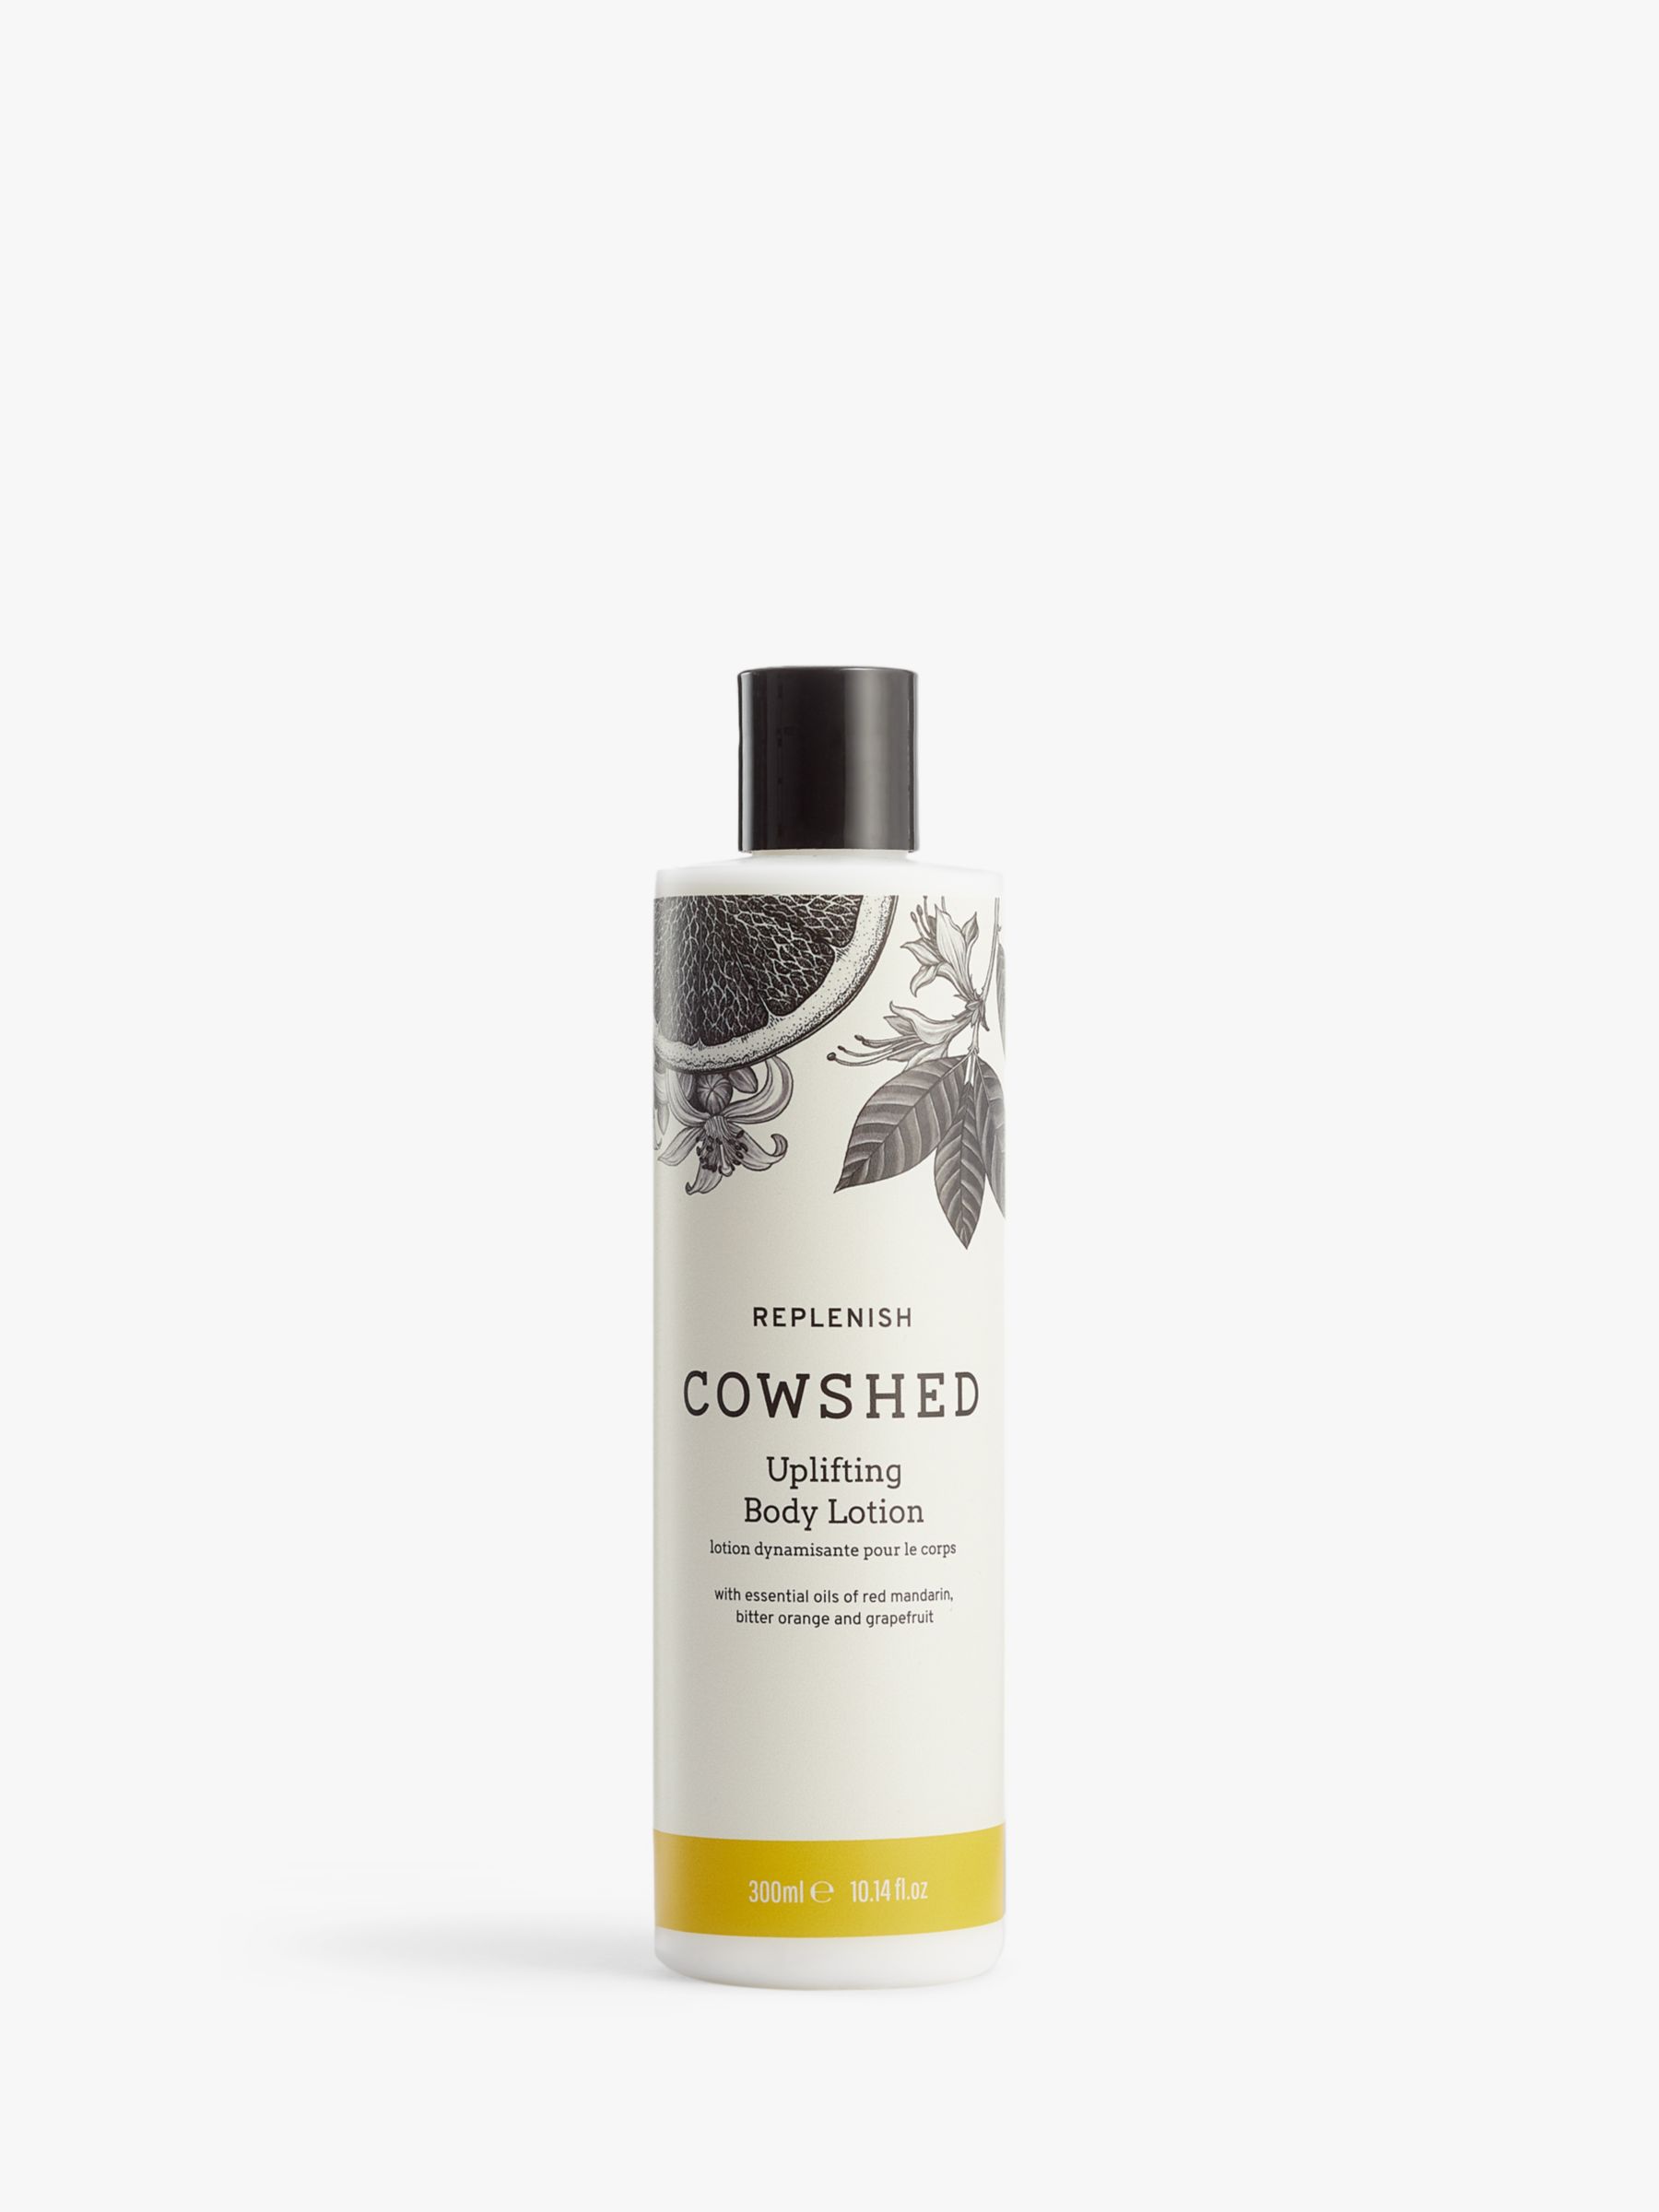 Cowshed Replenish Uplifting Body Lotion, 300ml 1